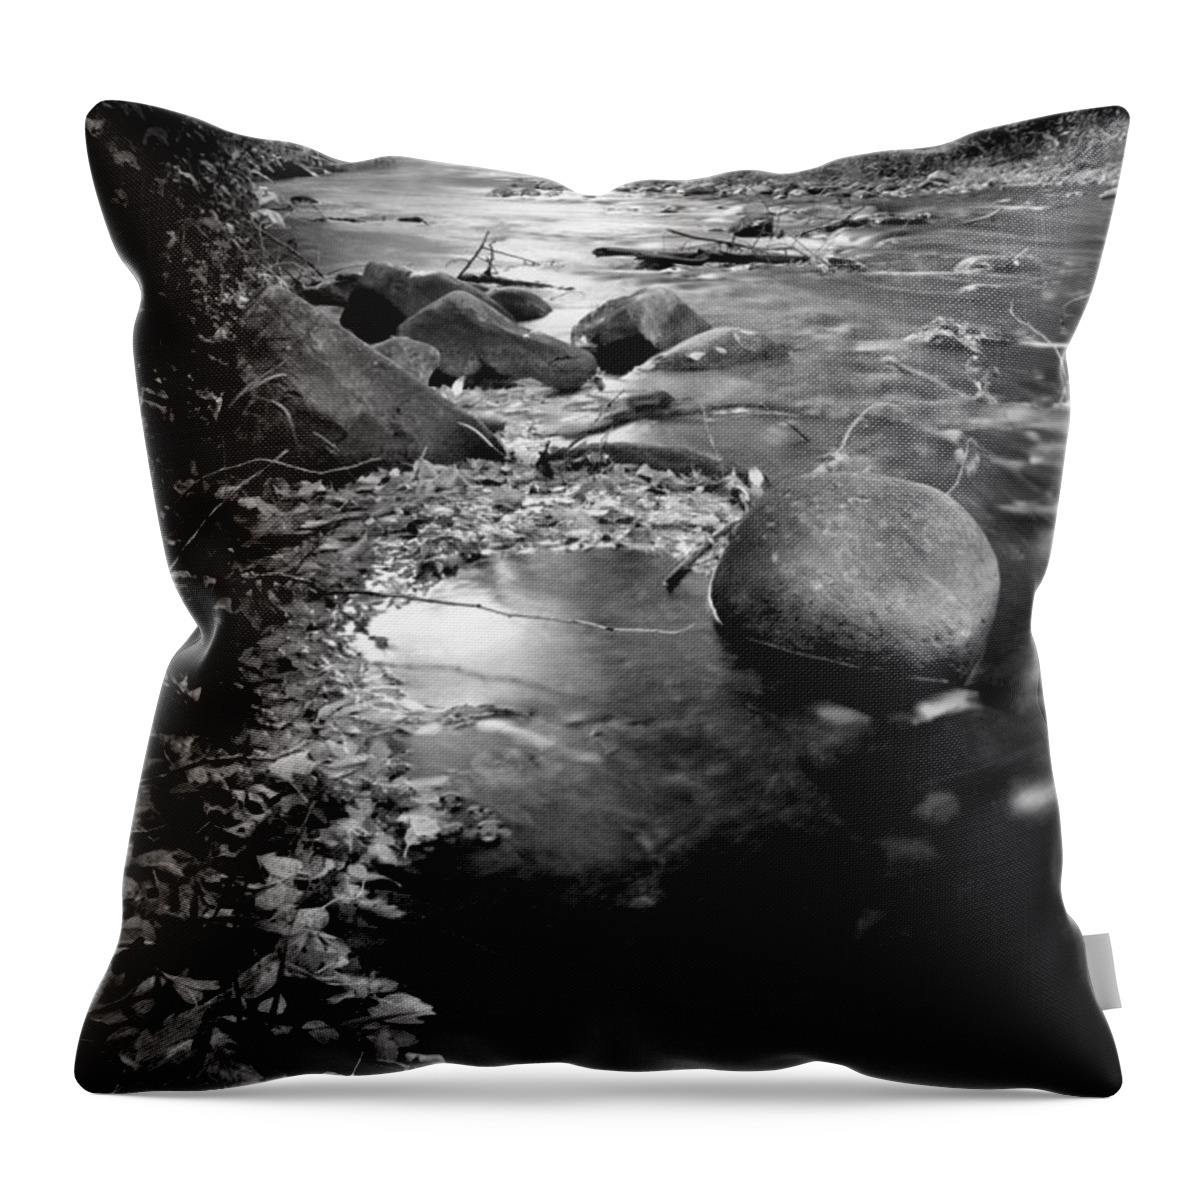 River Throw Pillow featuring the photograph Provo River Monochrome by Nathan Abbott